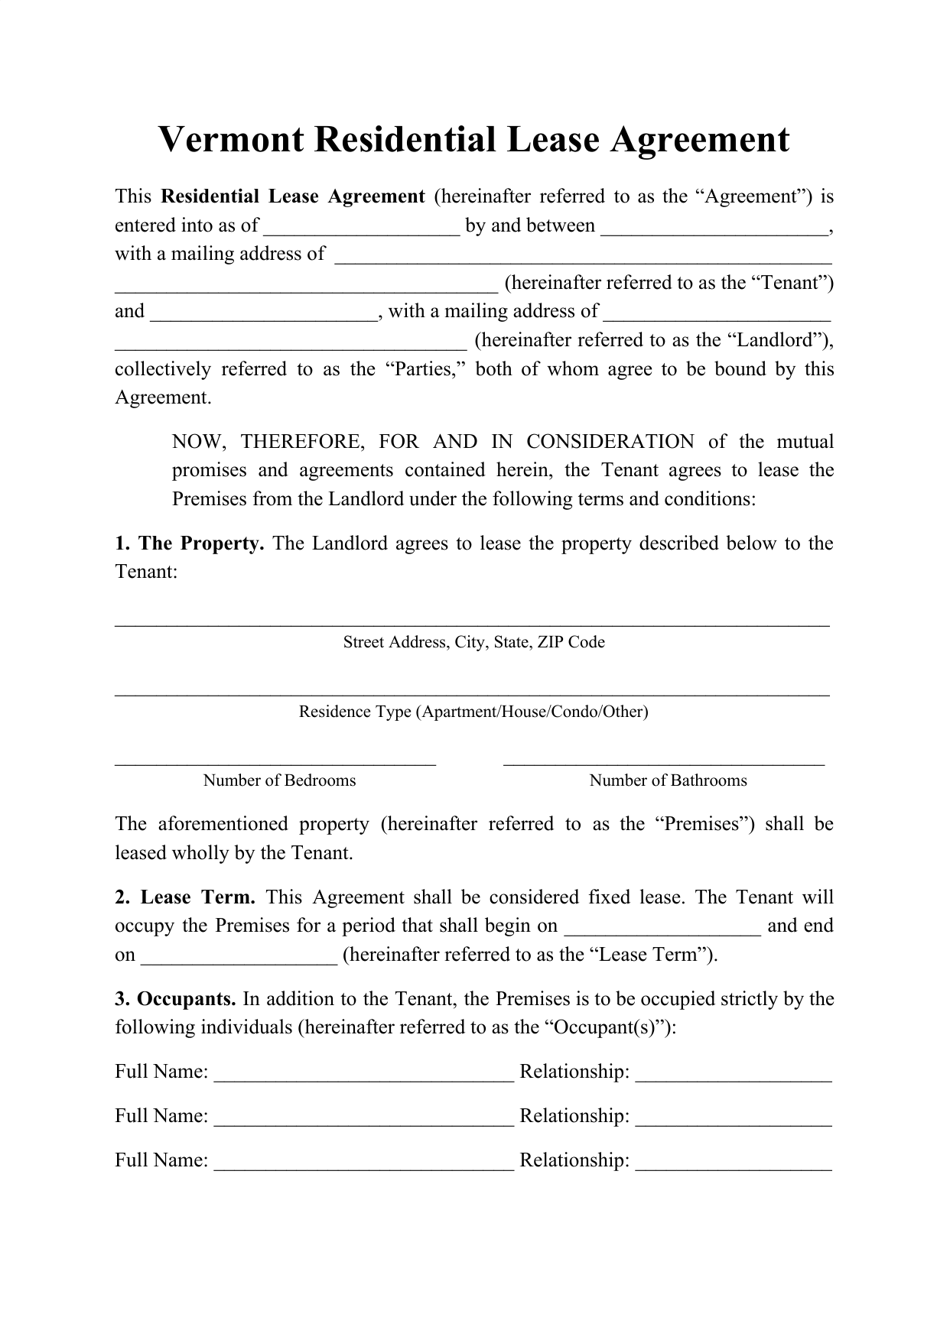 Residential Lease Agreement Template - Vermont, Page 1